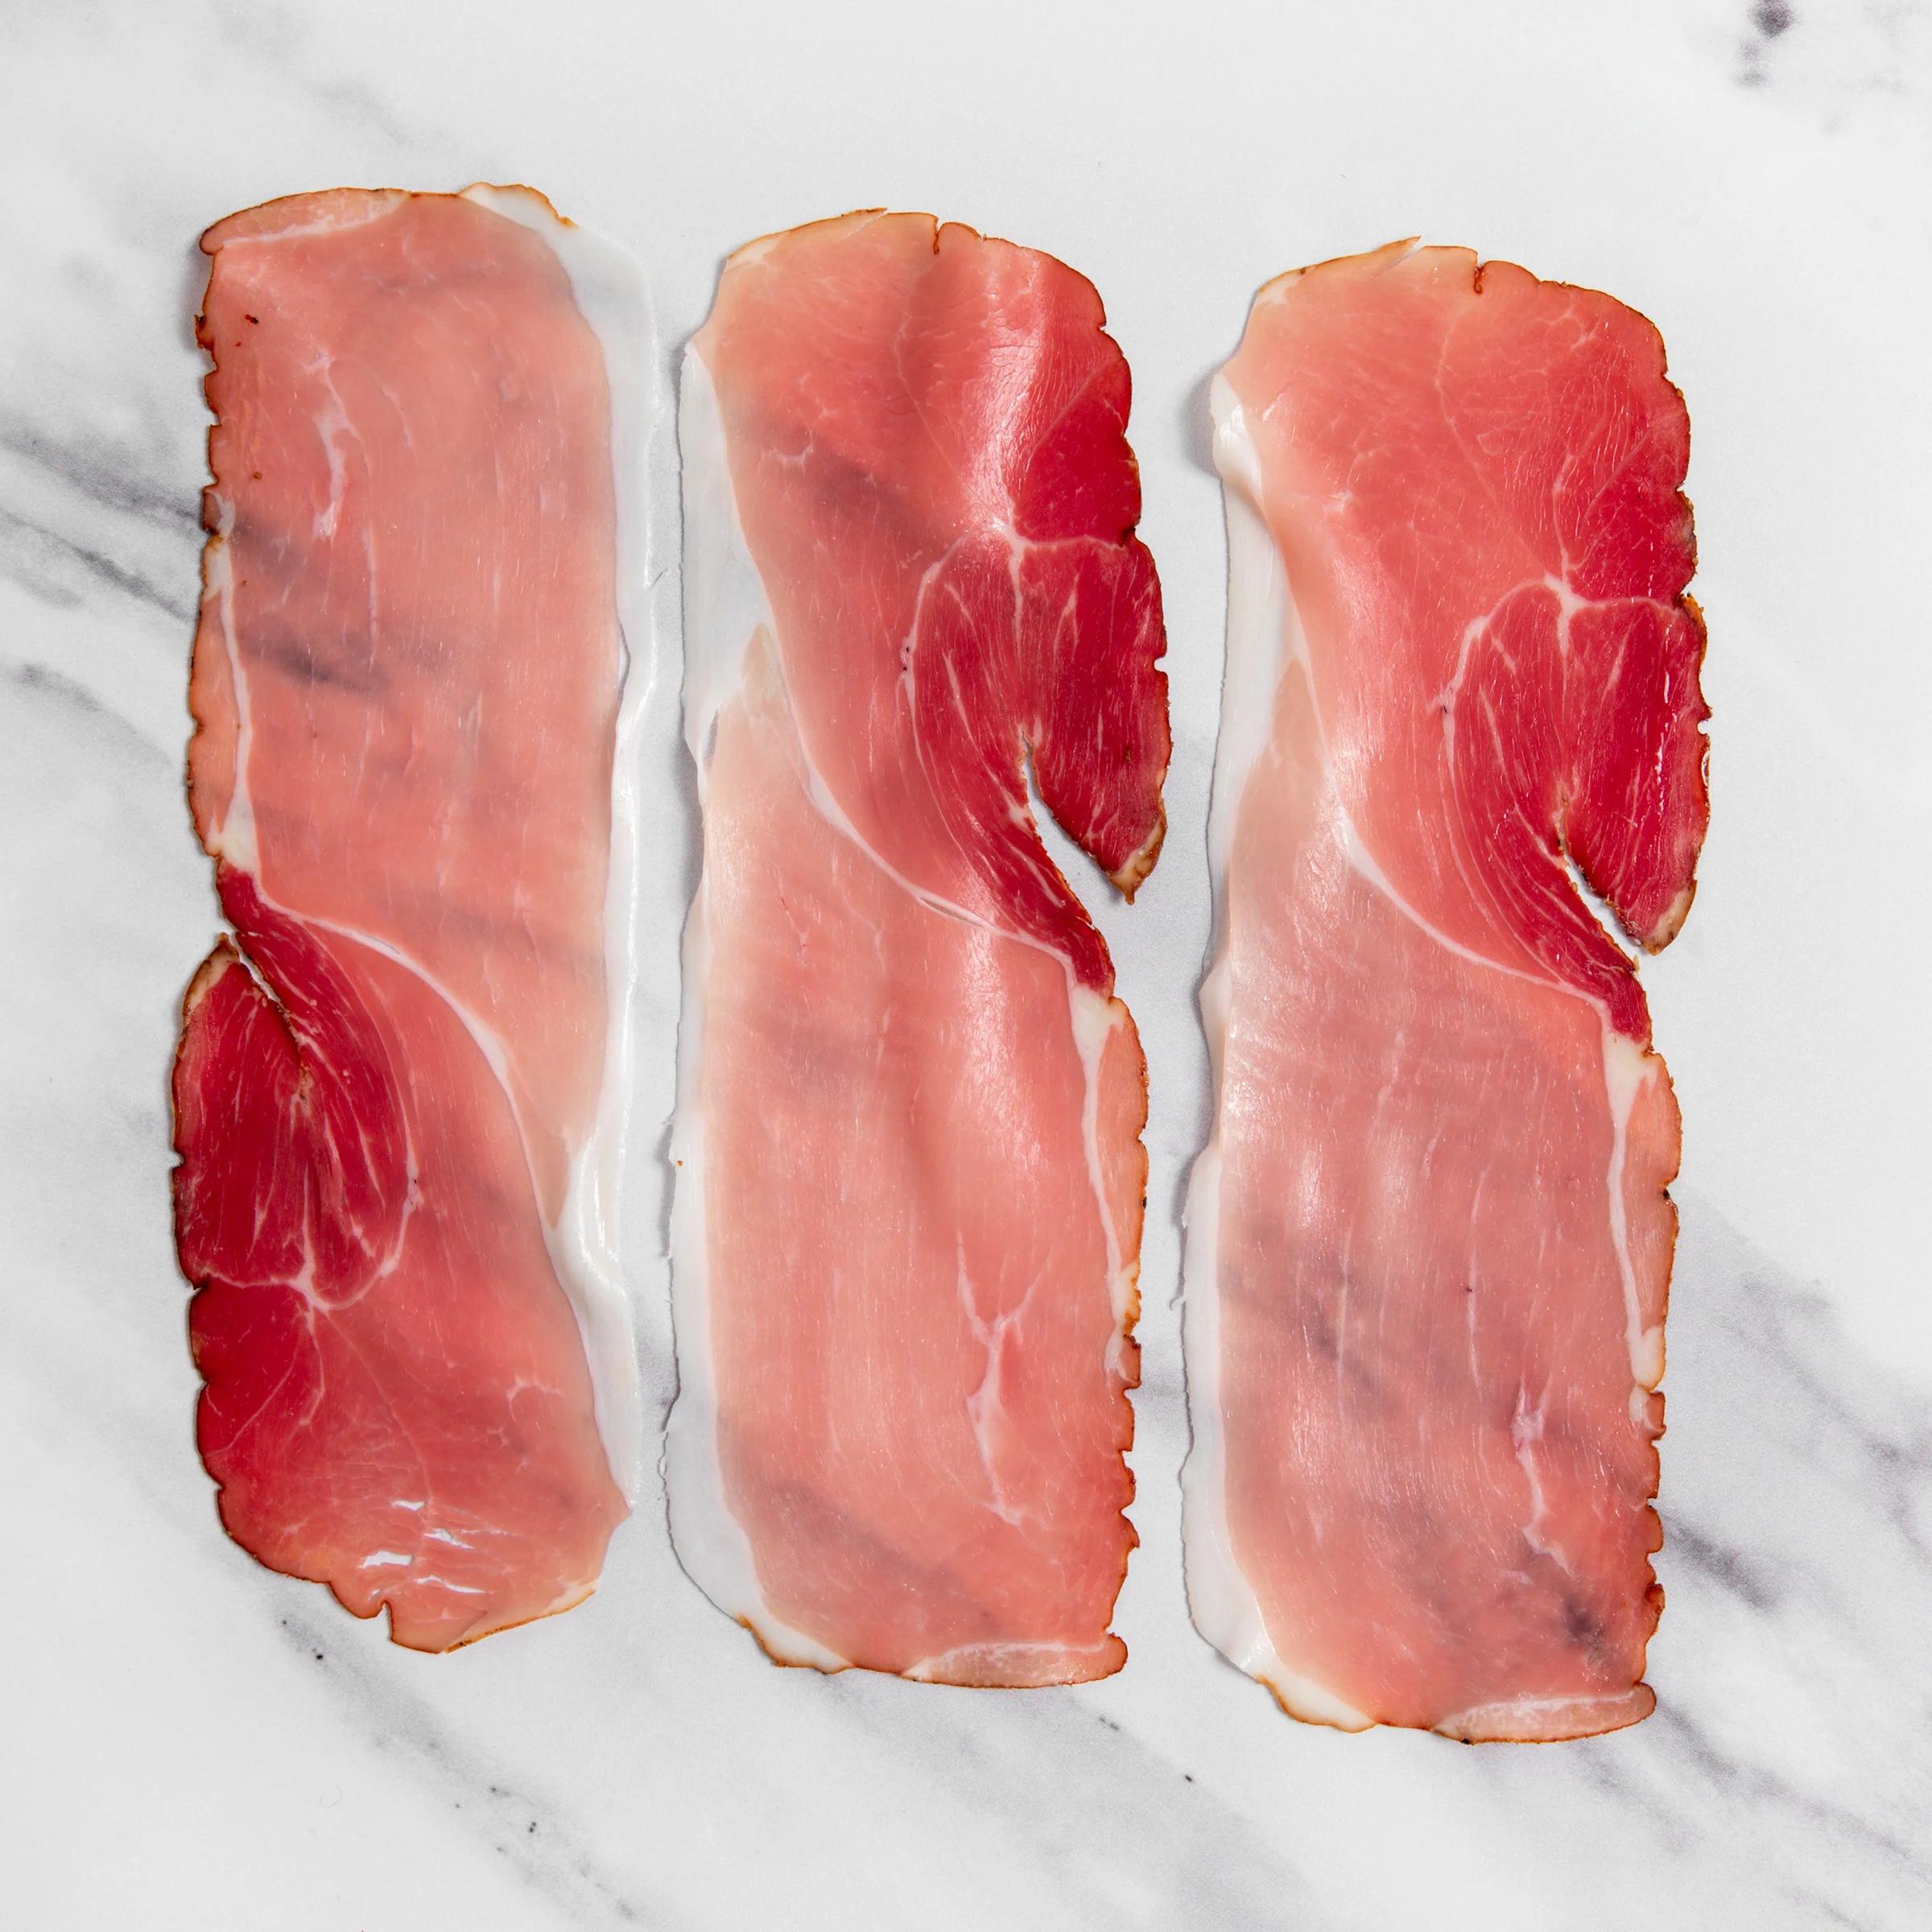 dry cured smoked ham - Do you have to cook dry cured smoked ham